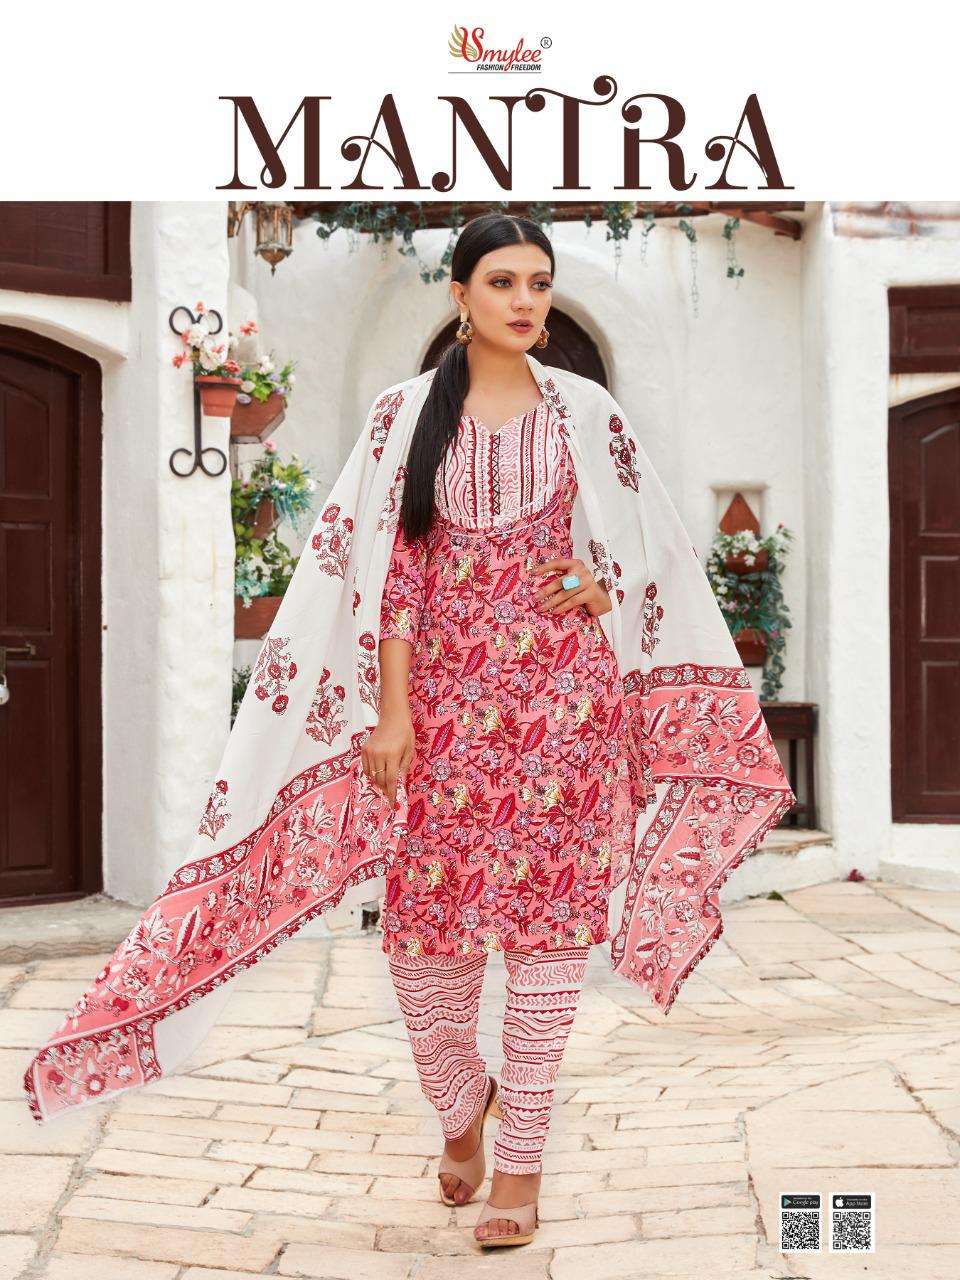 Smylee Mantra Rayon print With Work readymade suits Collecti...